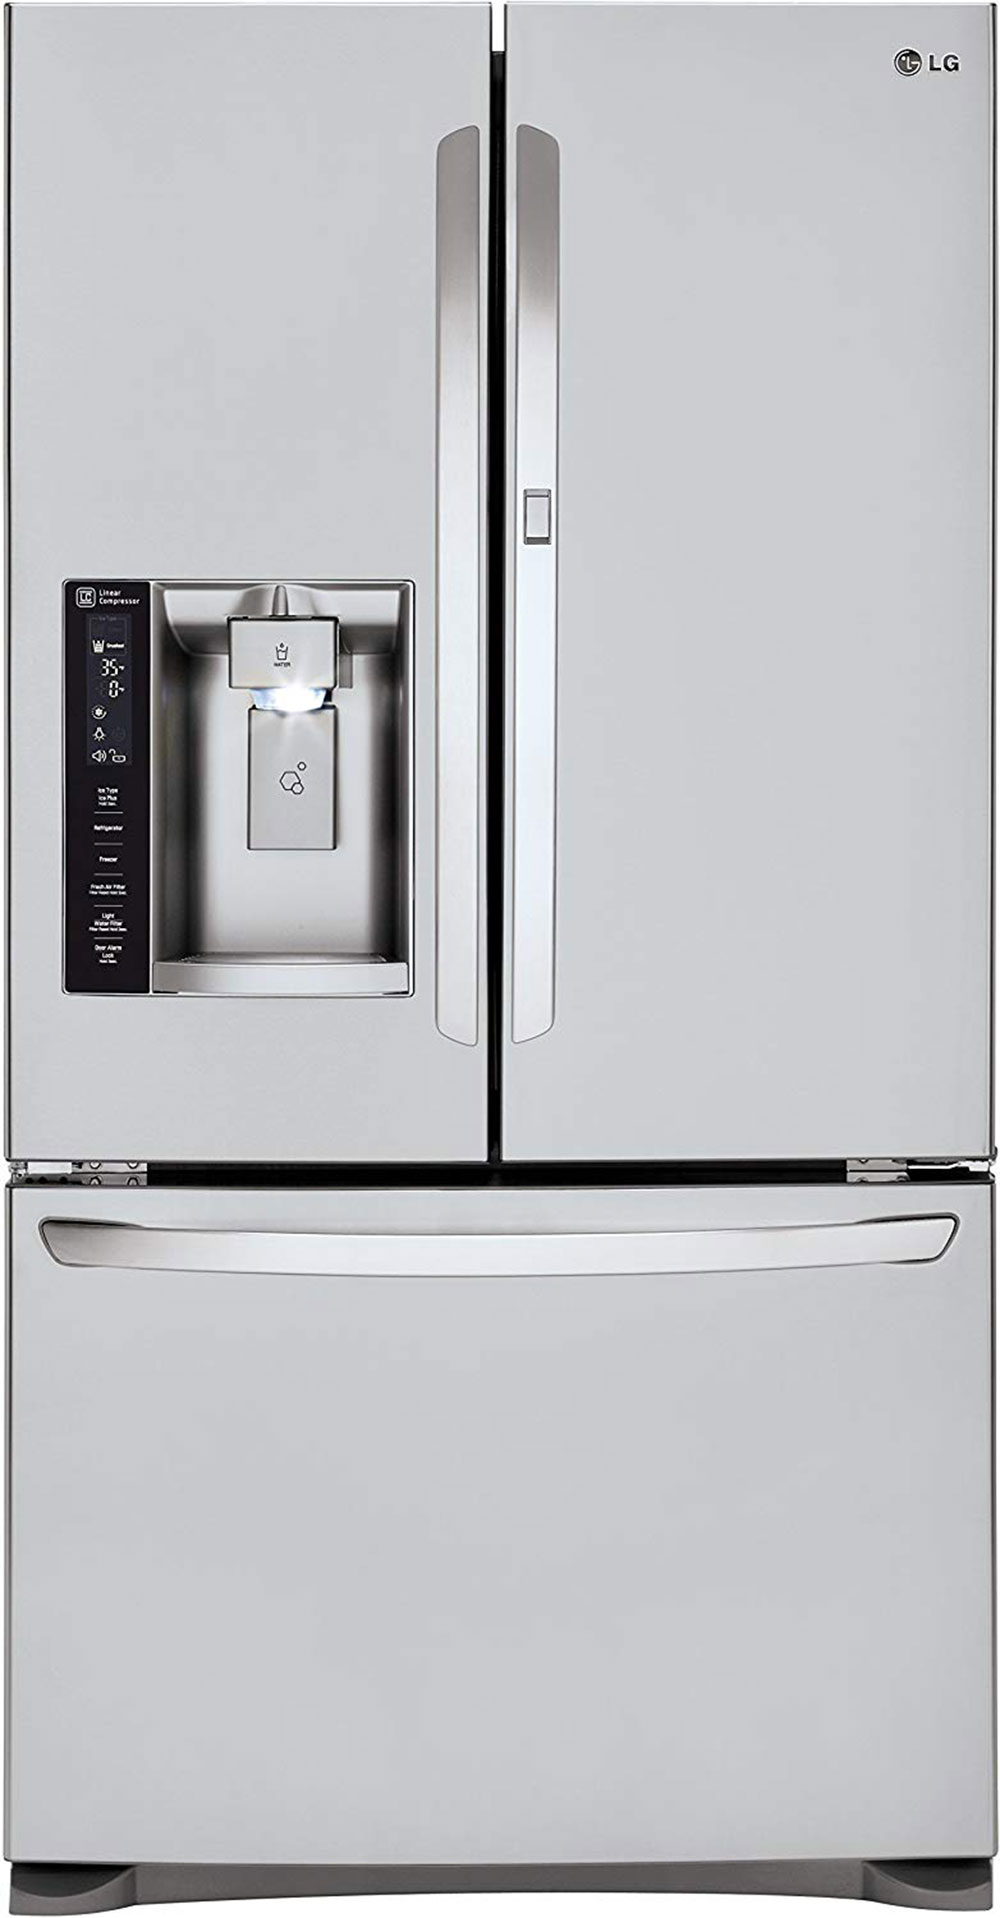 LG-French-Door-Refrigerator What’s the best counter depth refrigerator you can get online?